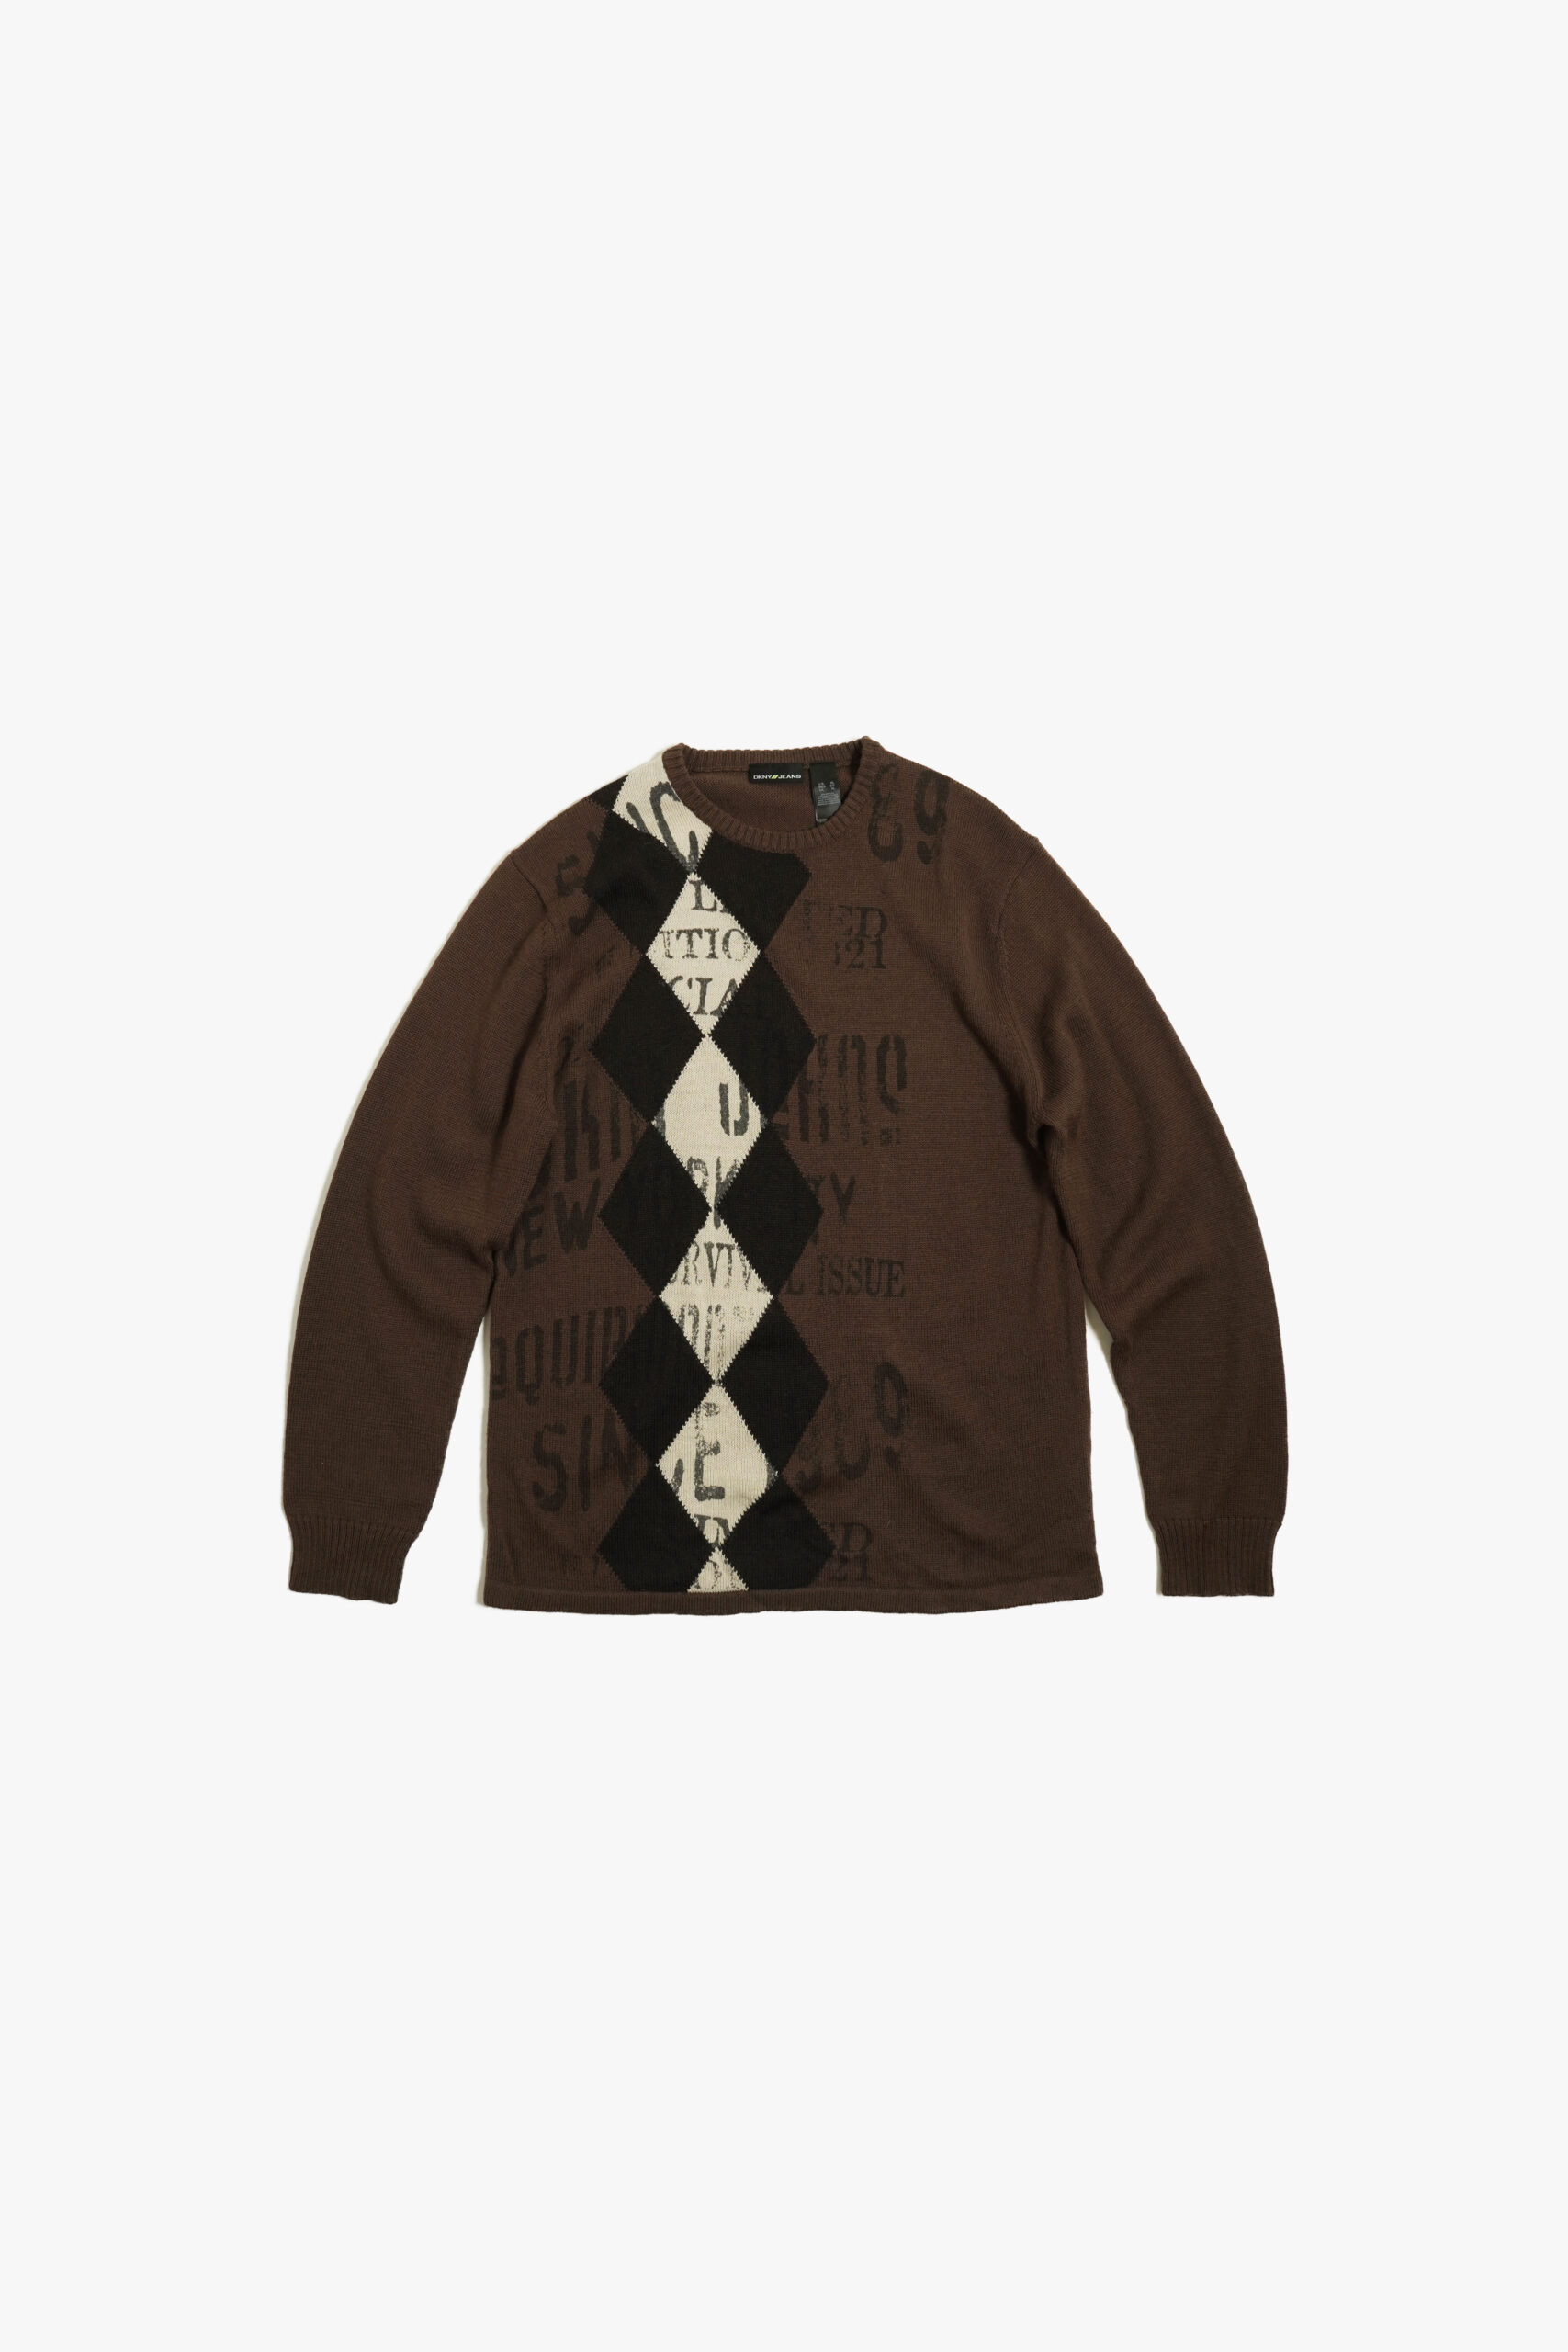 DKNY JEANS DESIGND PRINTED KNIT SWEATER BROWN COLOR